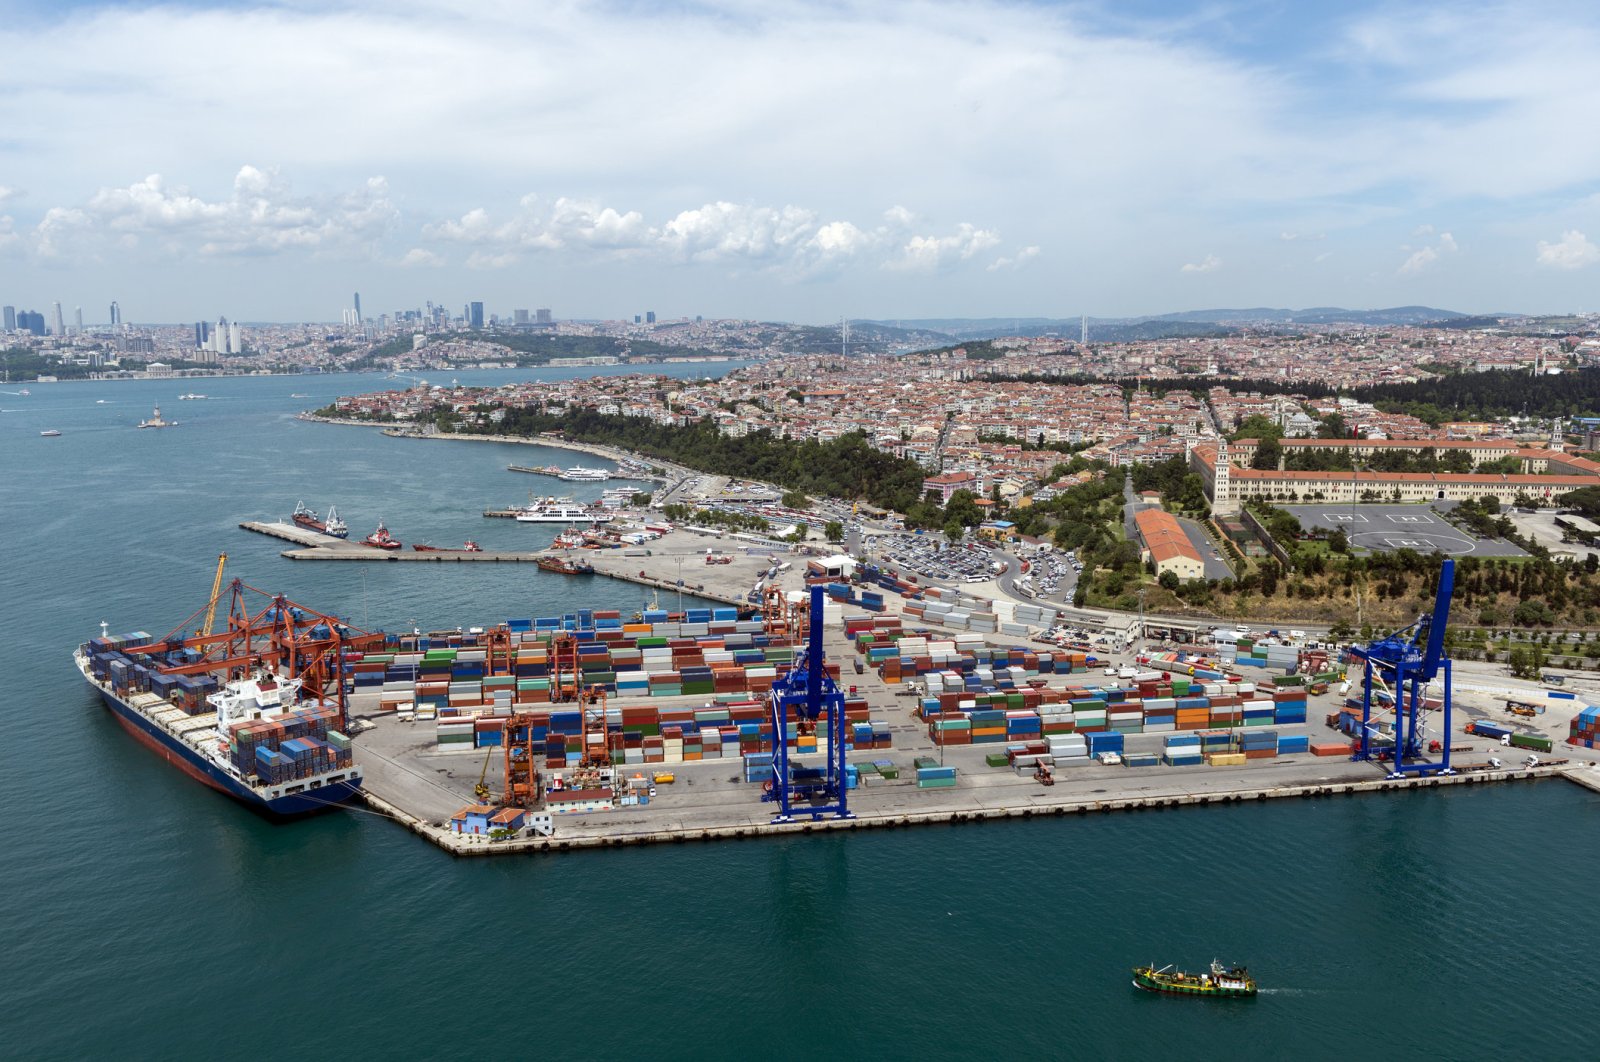 Aerial view of the container port and ship in Haydarpaşa Istanbul, Turkey. (Getty Images)